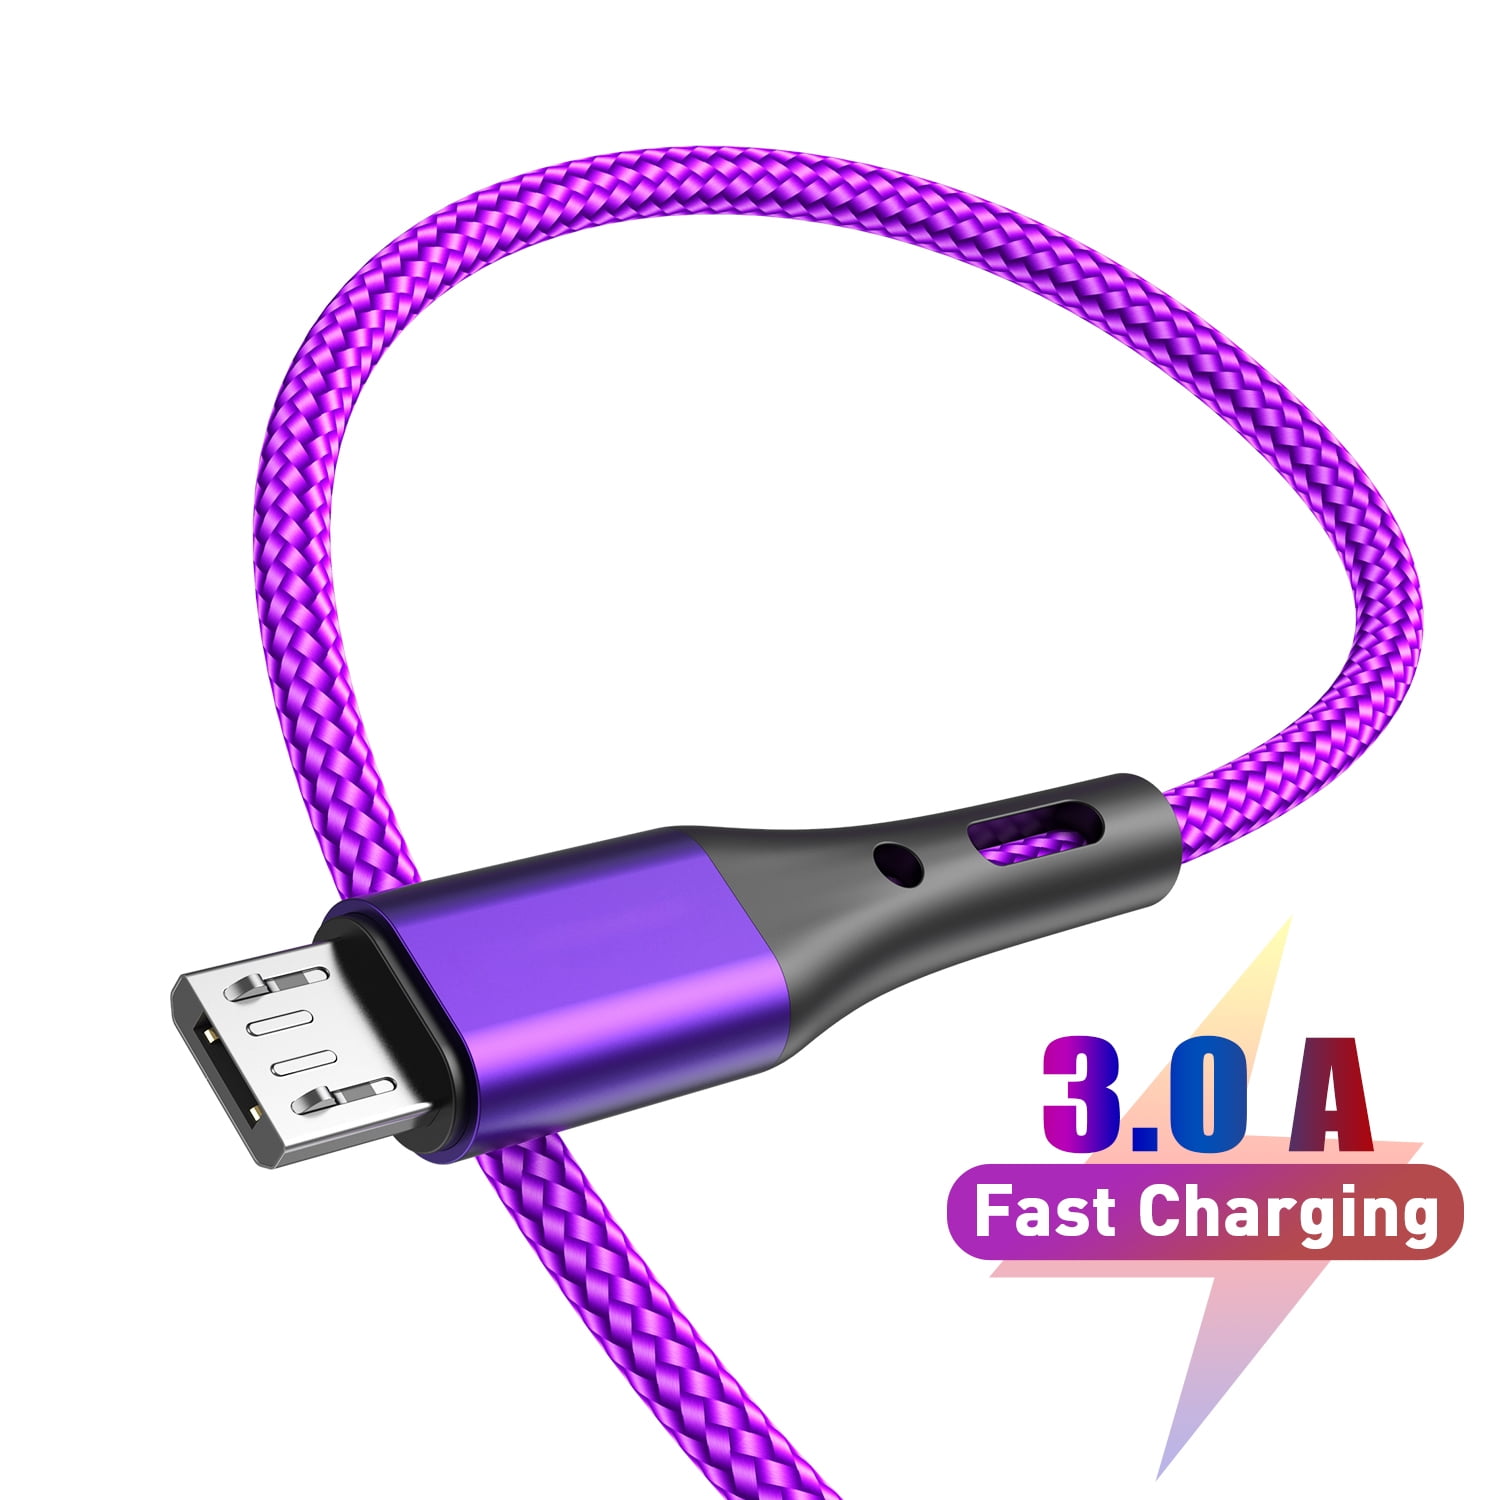 Micro USB Cable Canjoy 3 Pack USB to Micro USB Cable 6ft Braided Android Charger Fast Charging Cord Compatible Samsung Galaxy S7 S6 Edge J7,Motorola,LG,Nexus,Nokia,Sony,HTC,Xbox,PS4,Tablet,Camera,MP3 and More Android Devices Blue Rose Purple